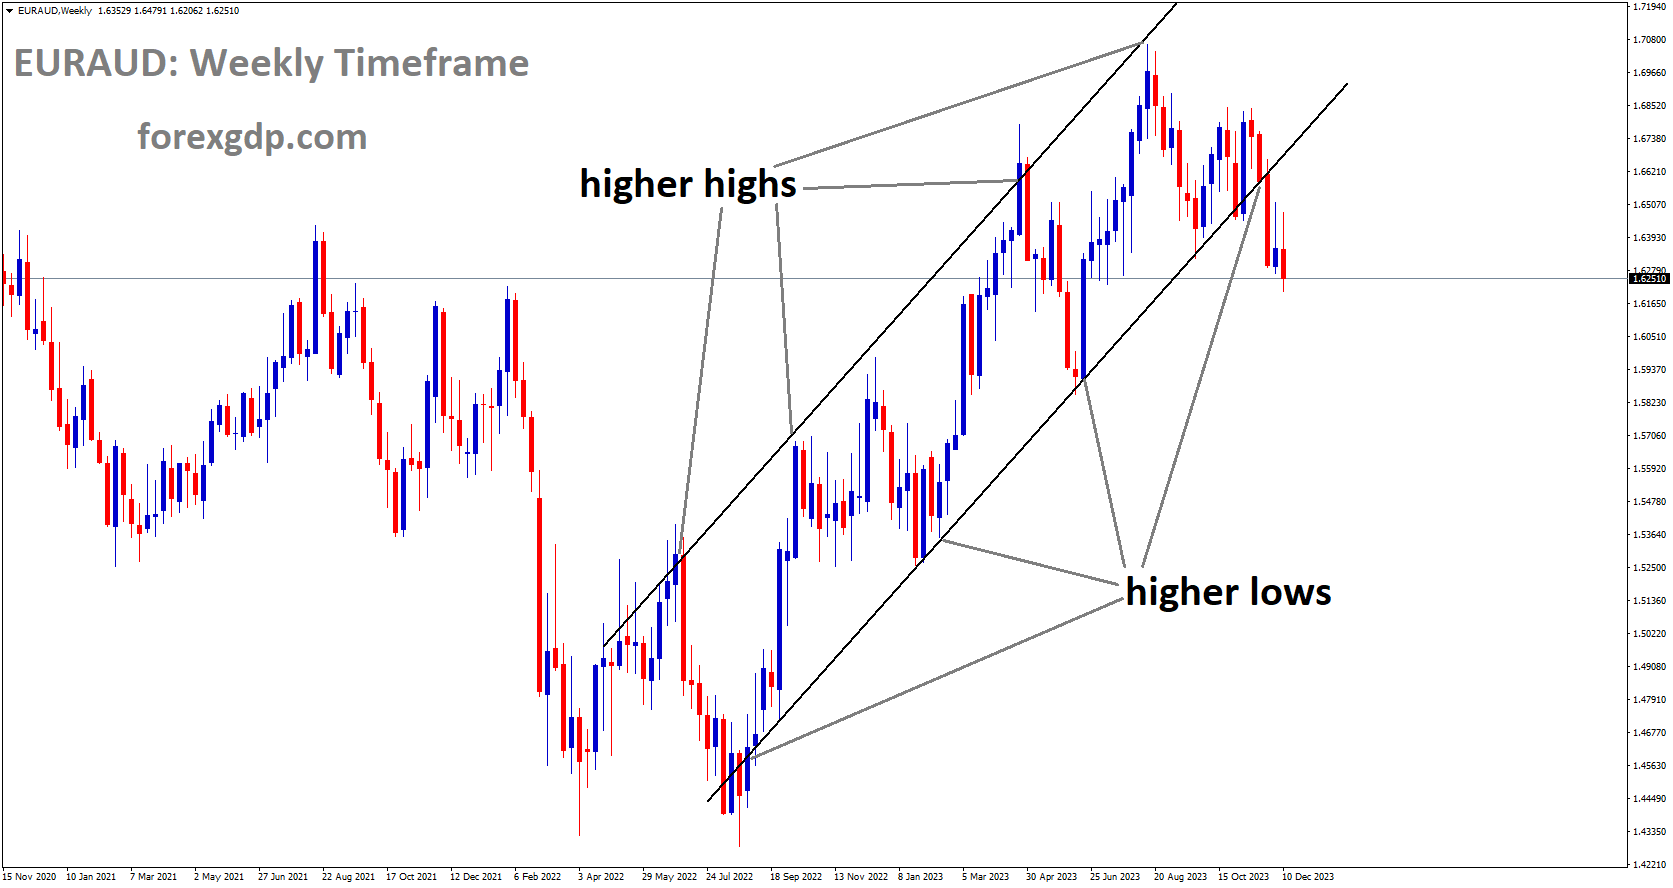 EURAUD is moving in Ascending channel and market has reached higher low area of the channel